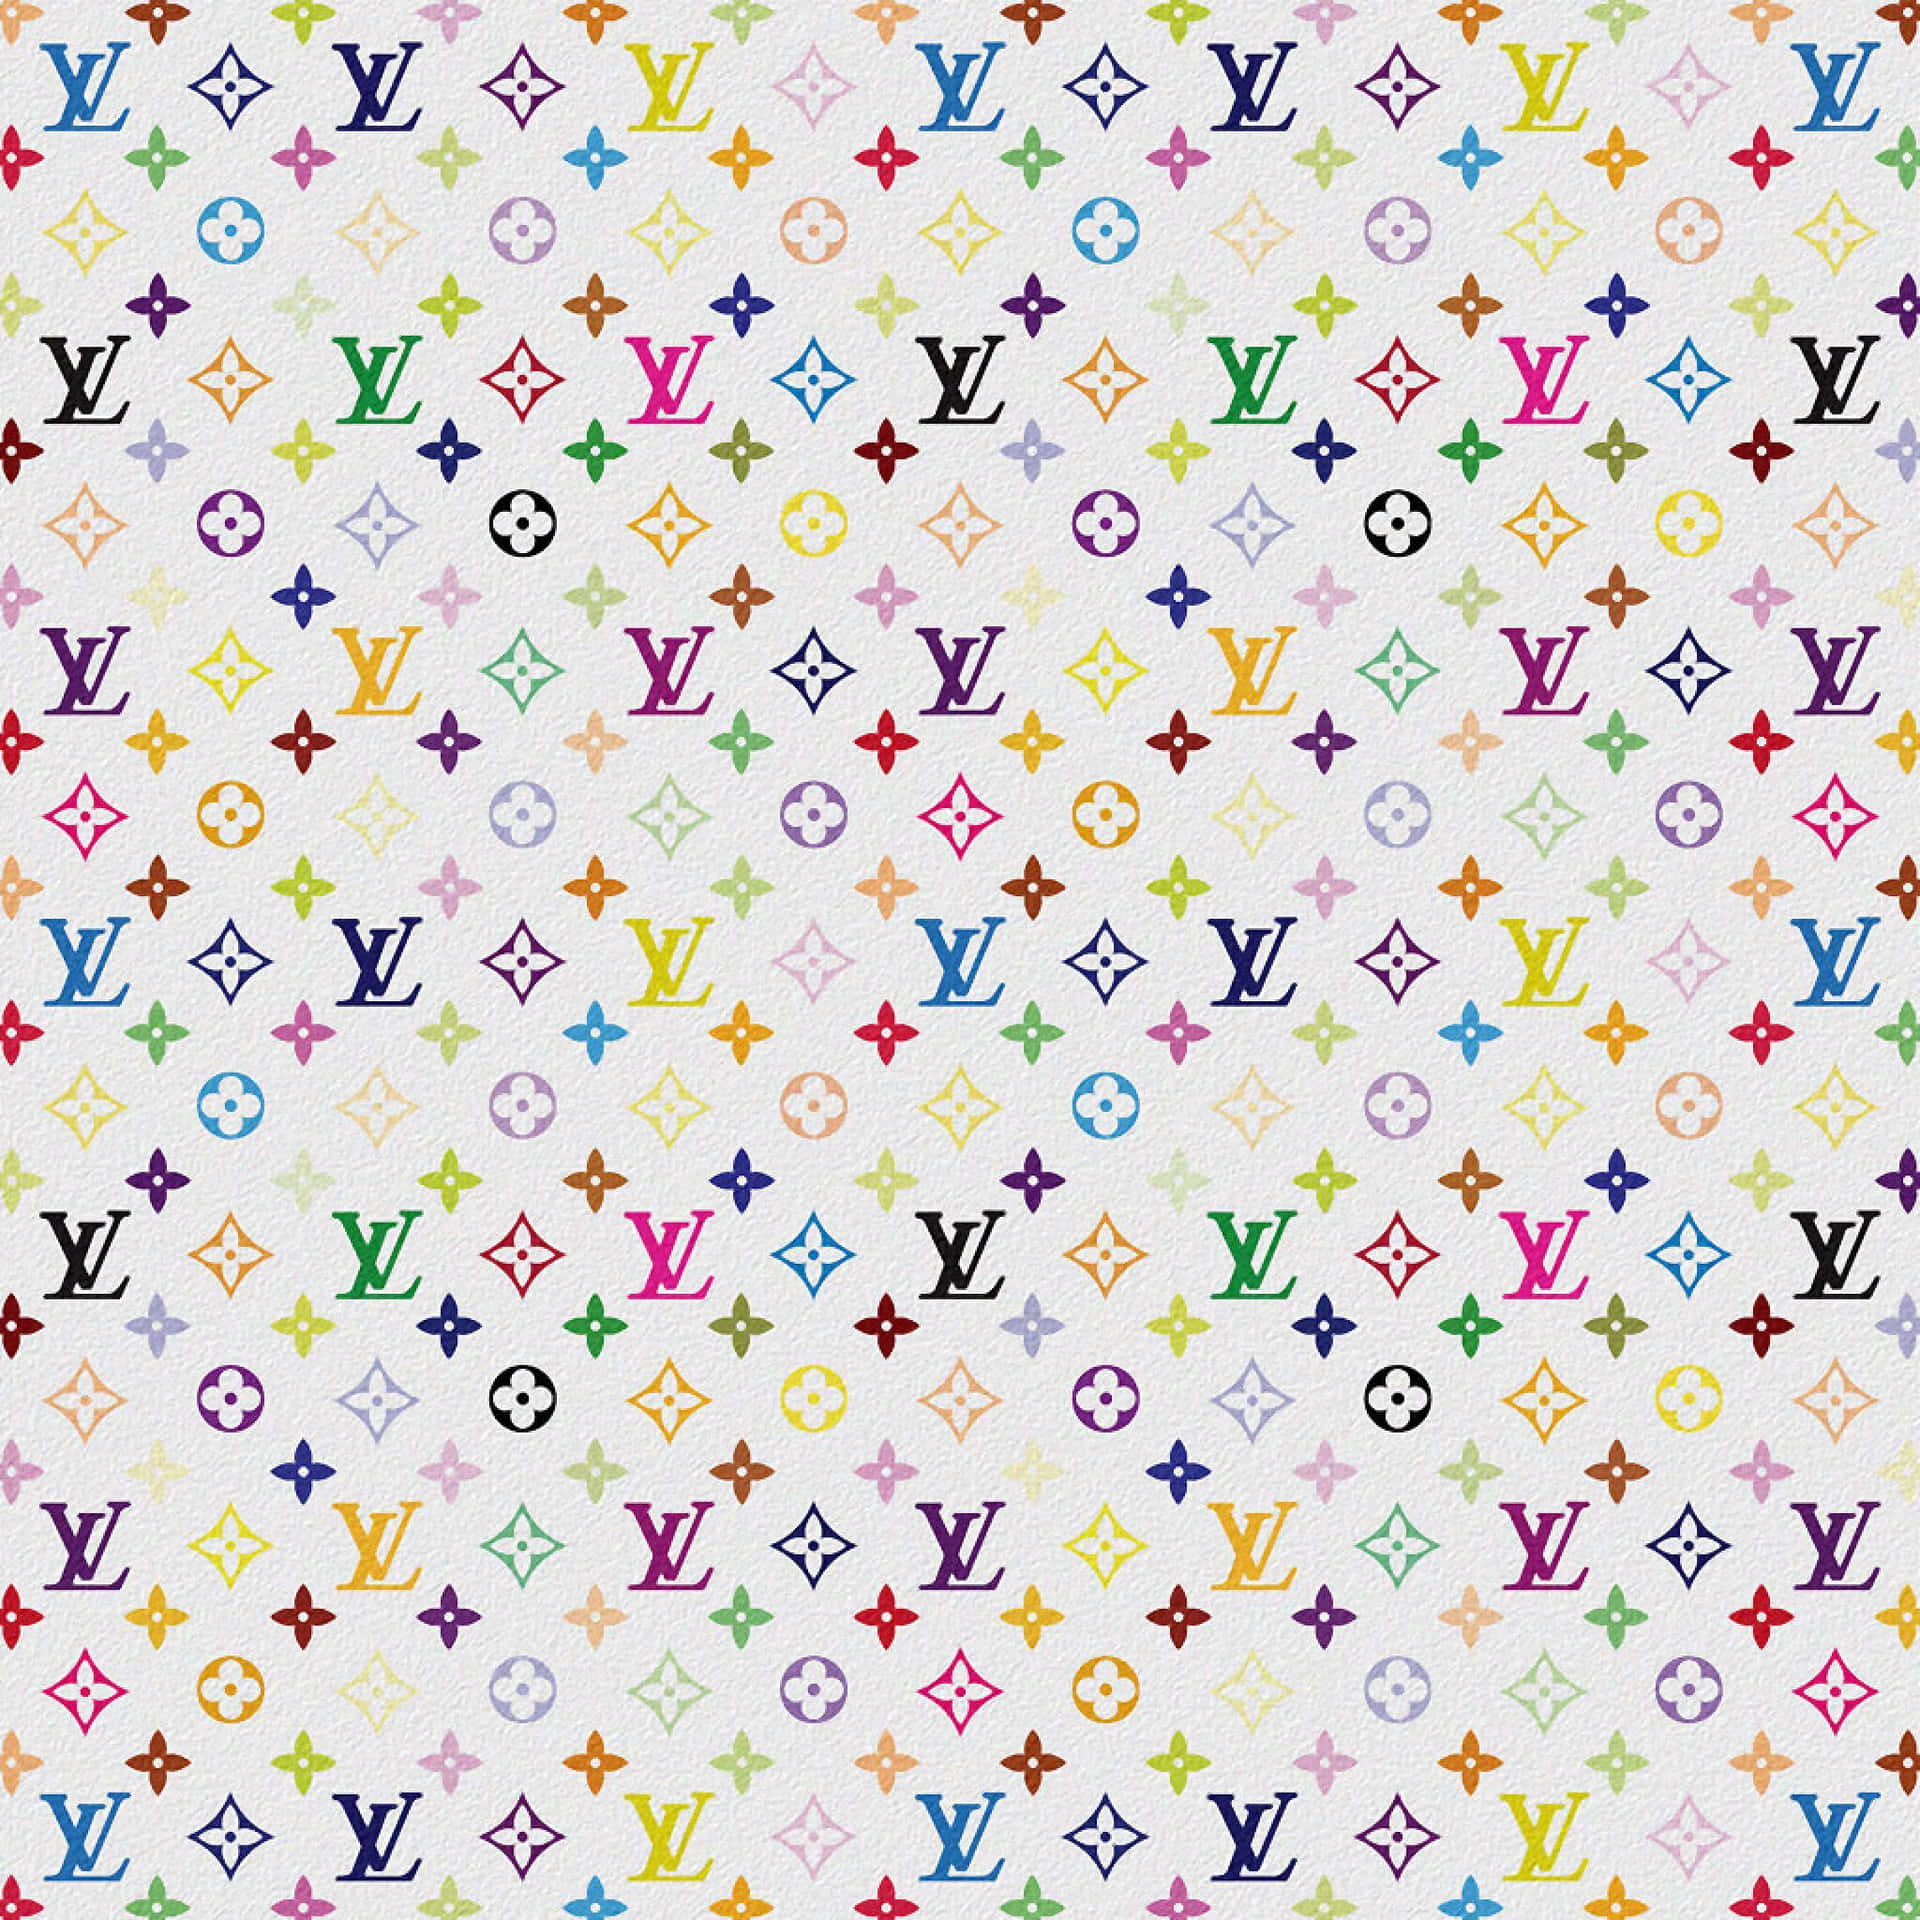 Download Brighten up your day with a bold Louis Vuitton print